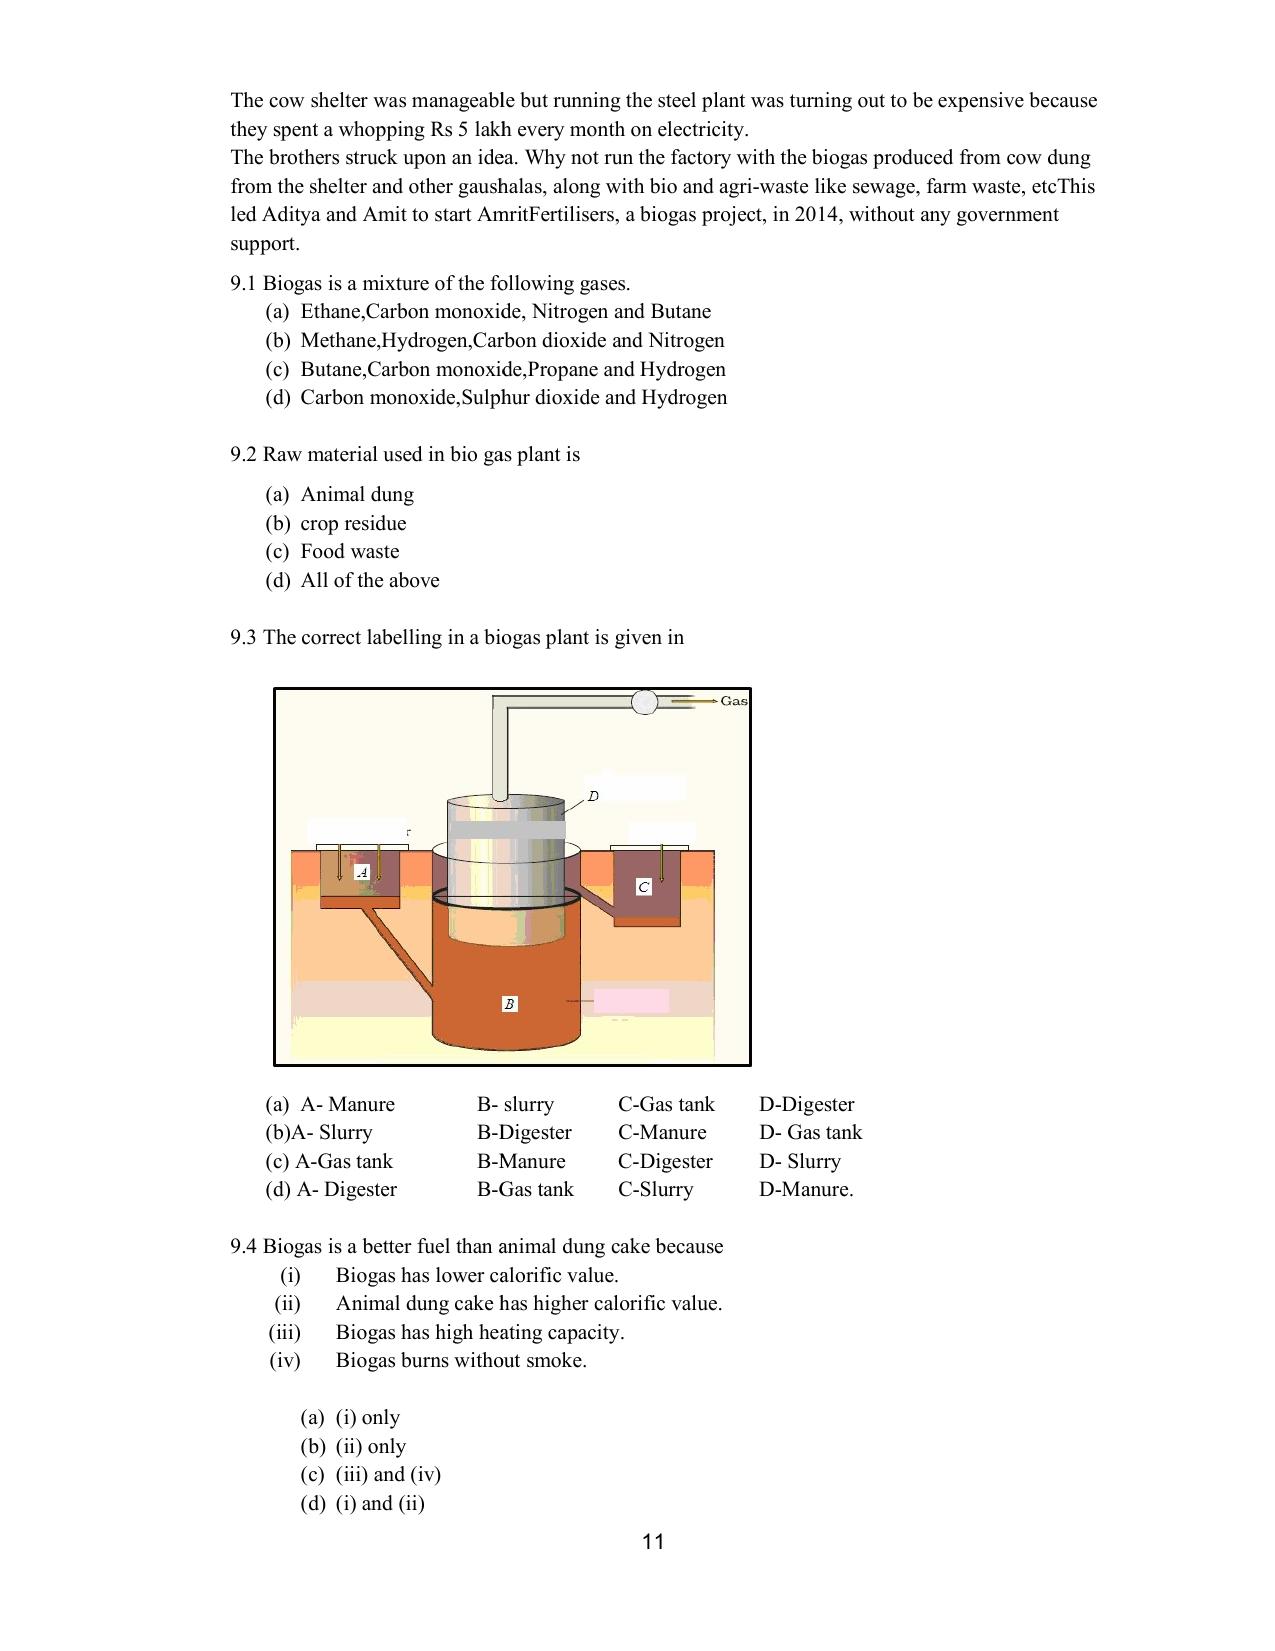 CBSE Class 10 Science Question Bank - Page 11